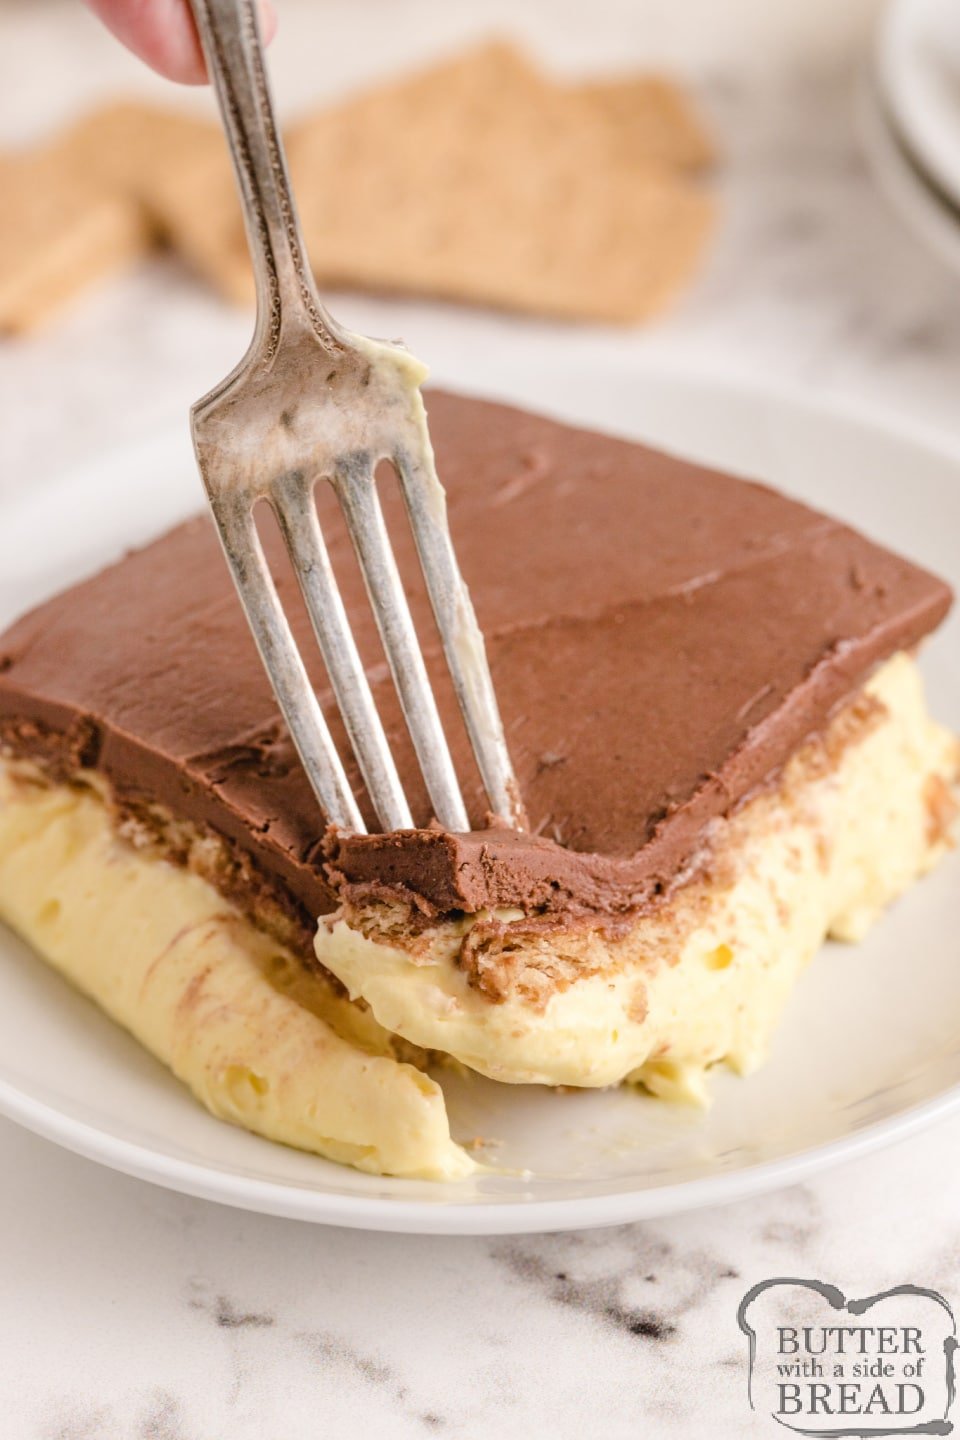 No Bake Eclair Cake made with graham crackers, vanilla pudding and a delicious fudgy chocolate frosting layer on top. This no bake chocolate eclair dessert tastes just like a cream puff!